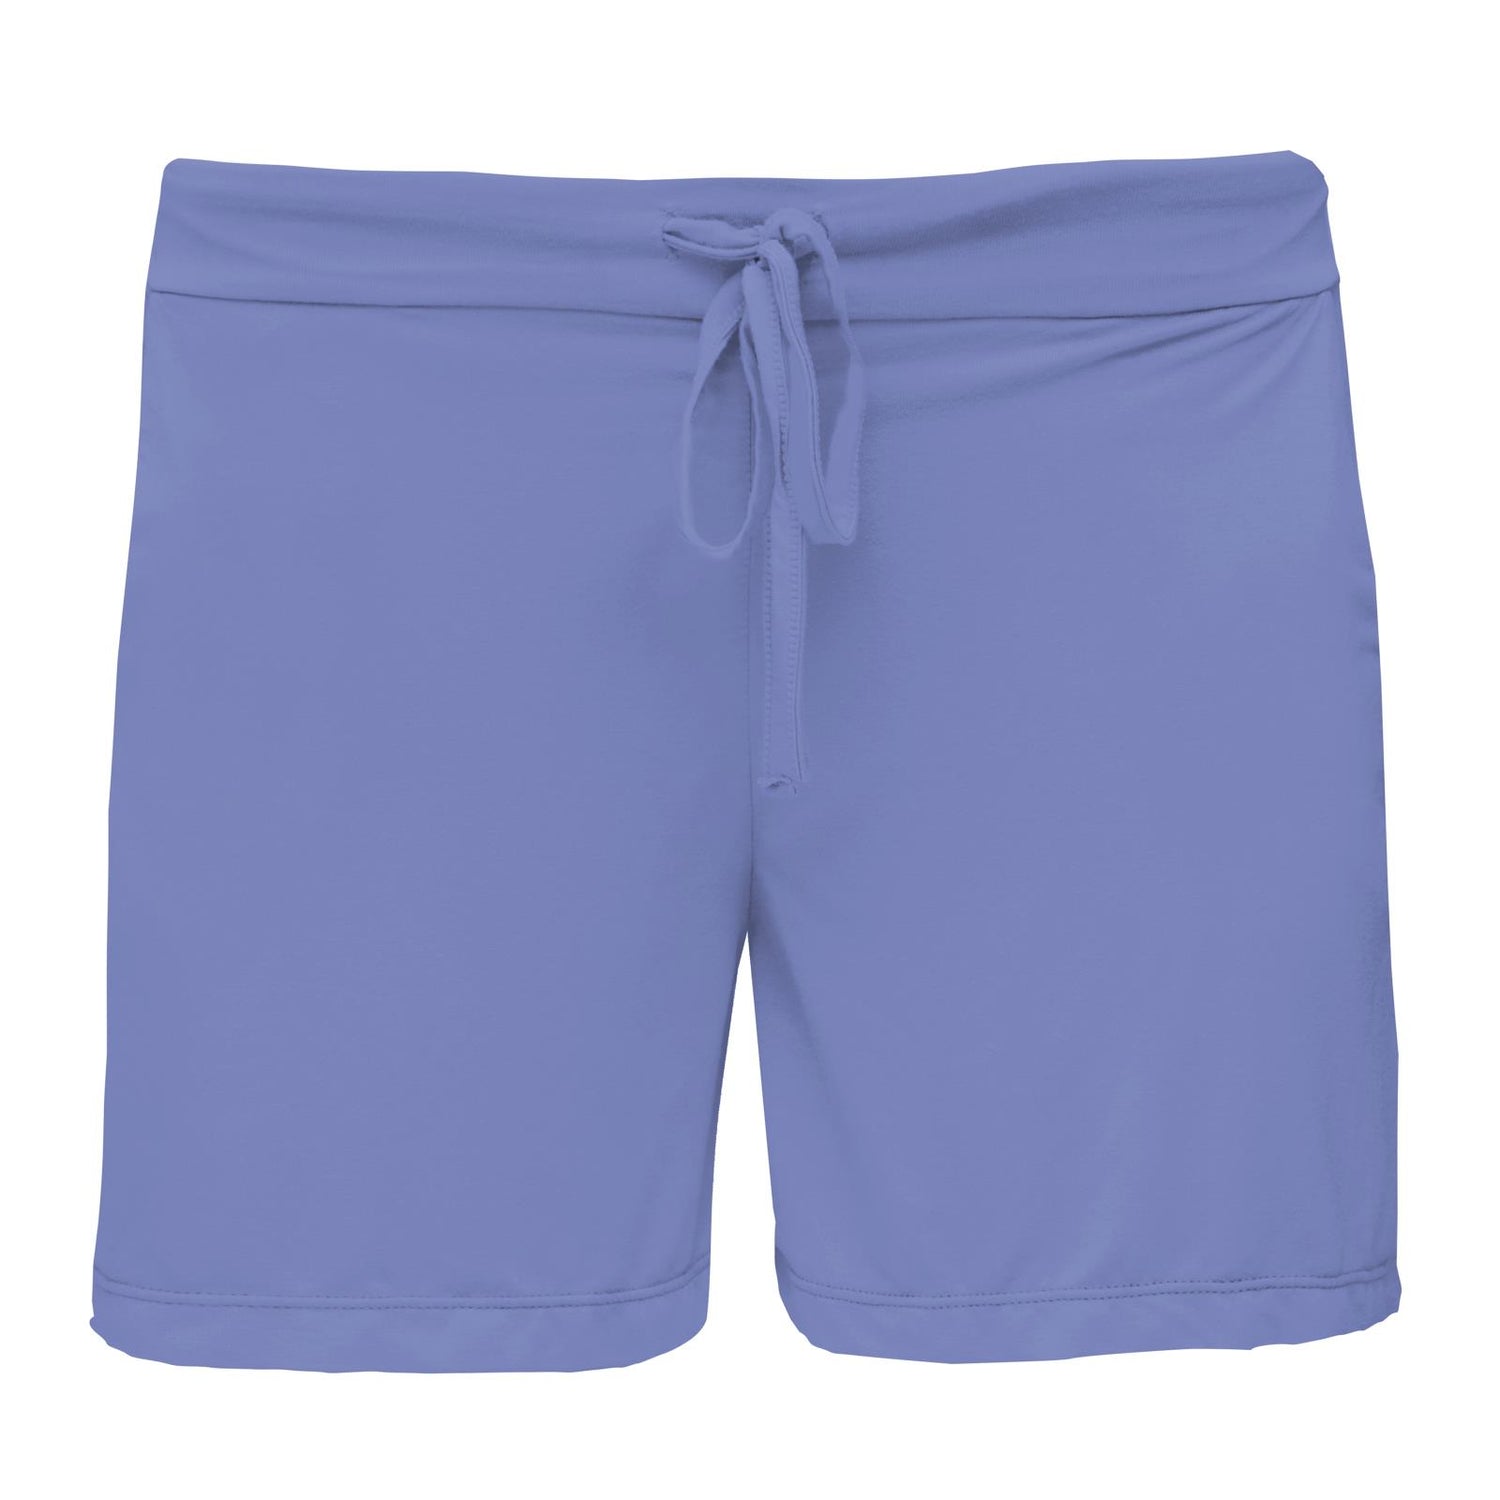 Women's Lounge Shorts in Forget Me Not